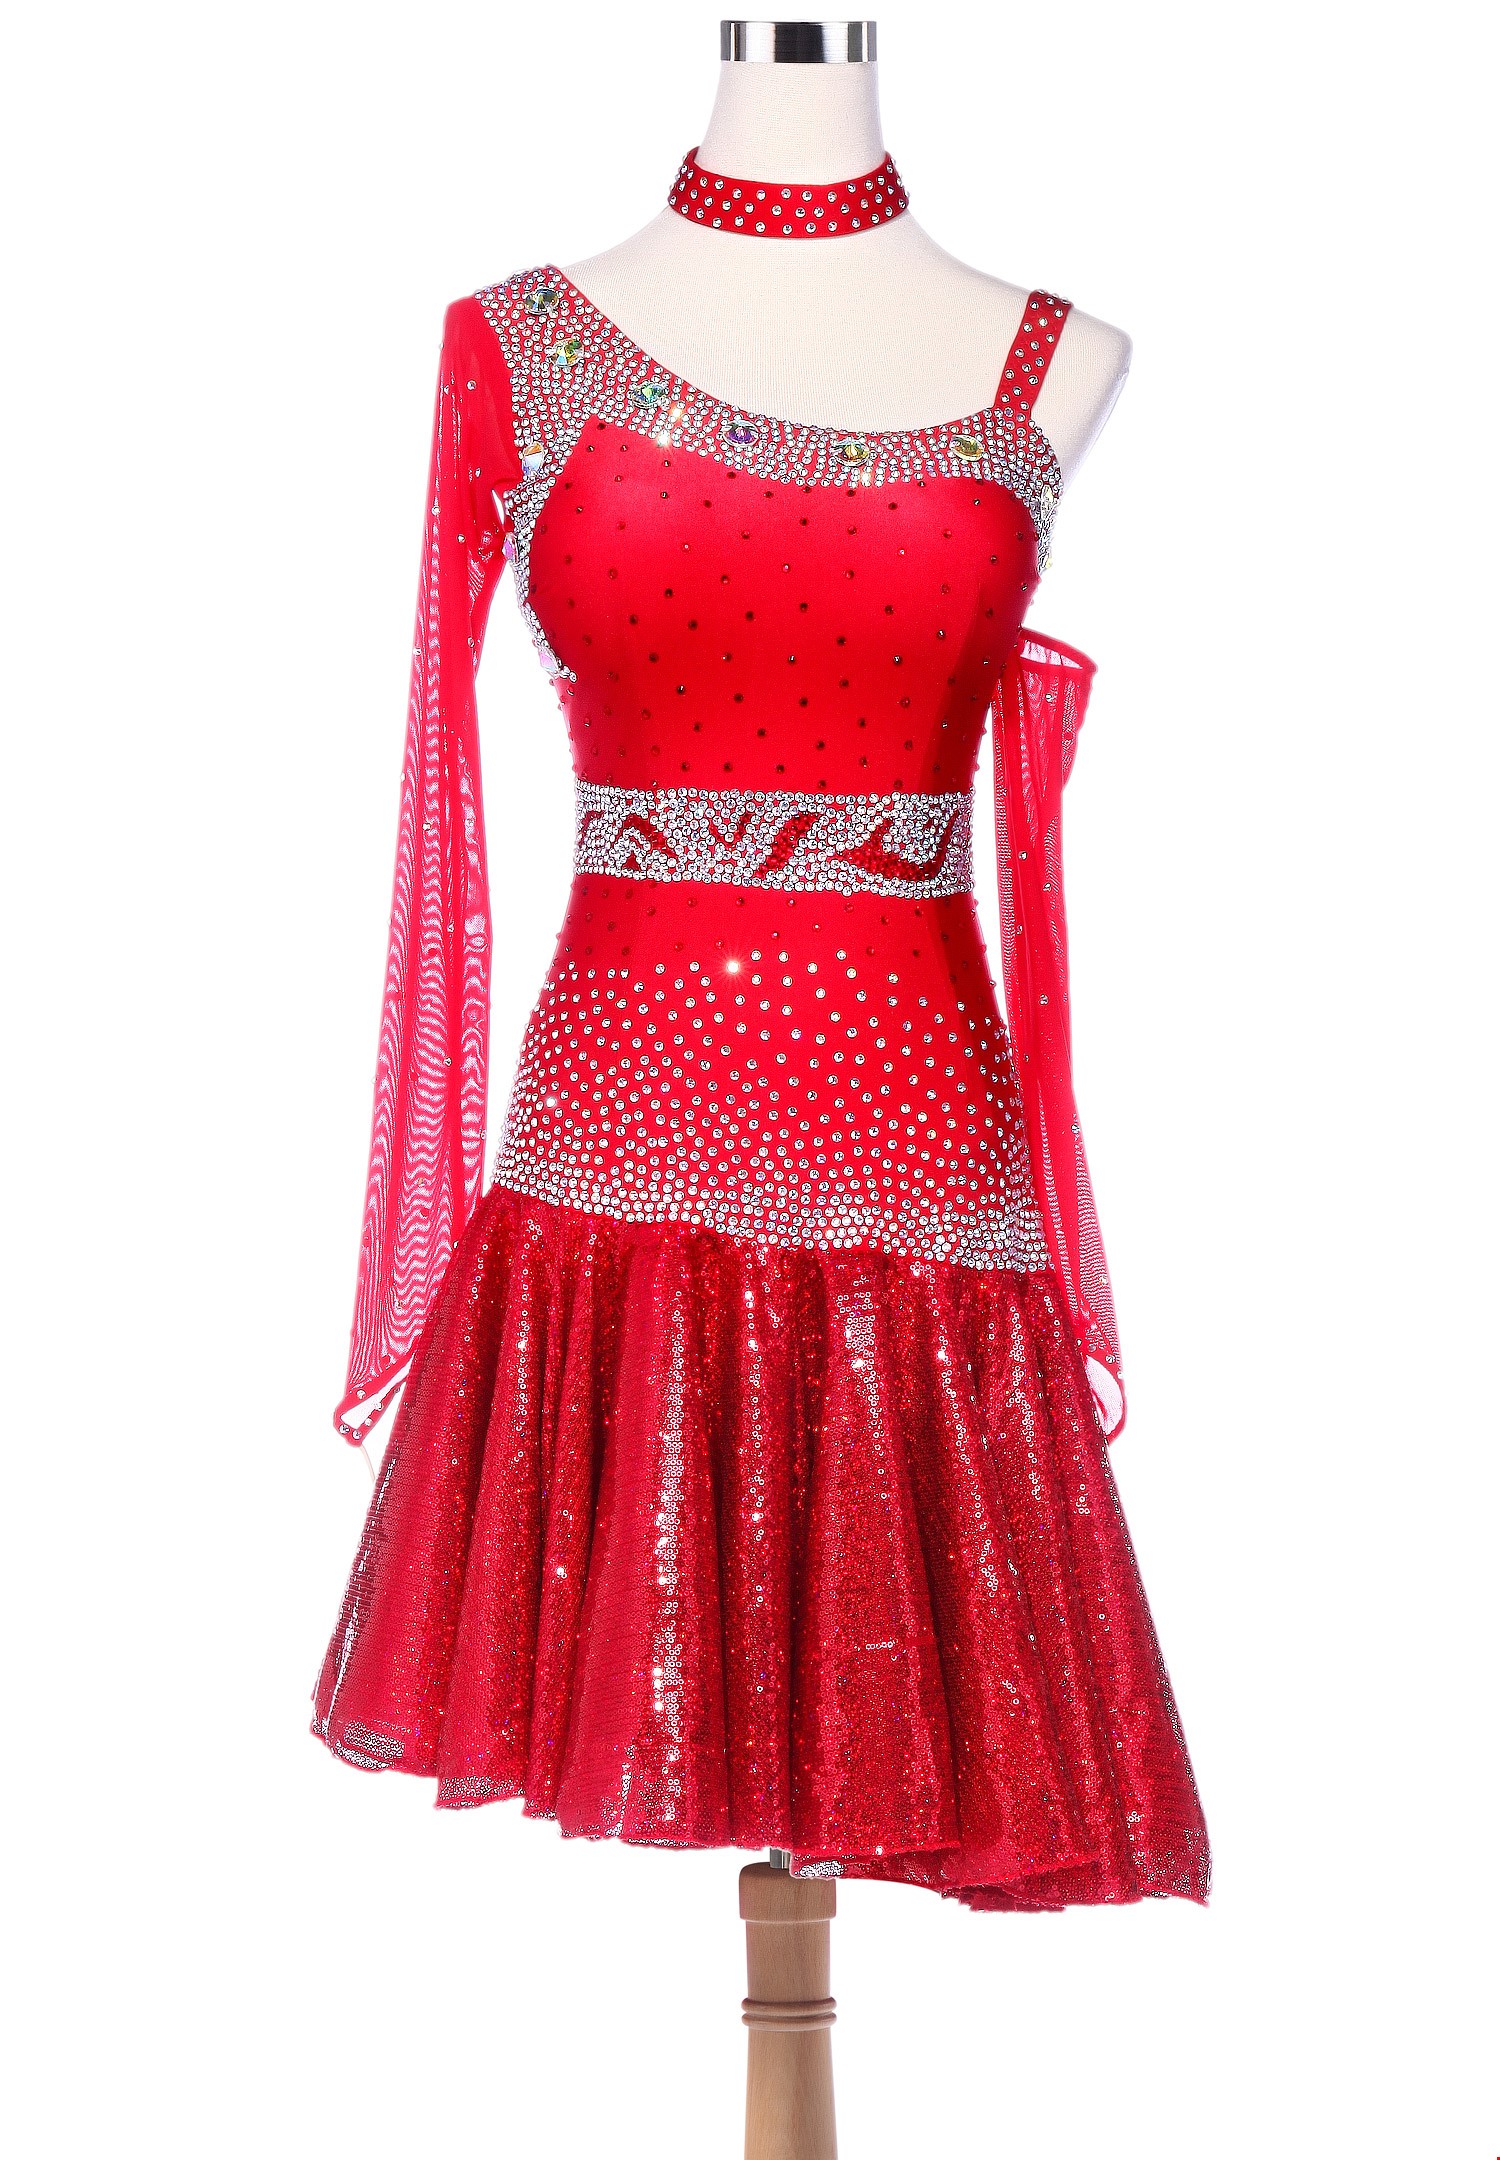 Latin Dance Dresses. What's hot and what's not - Ballroom Sparkle